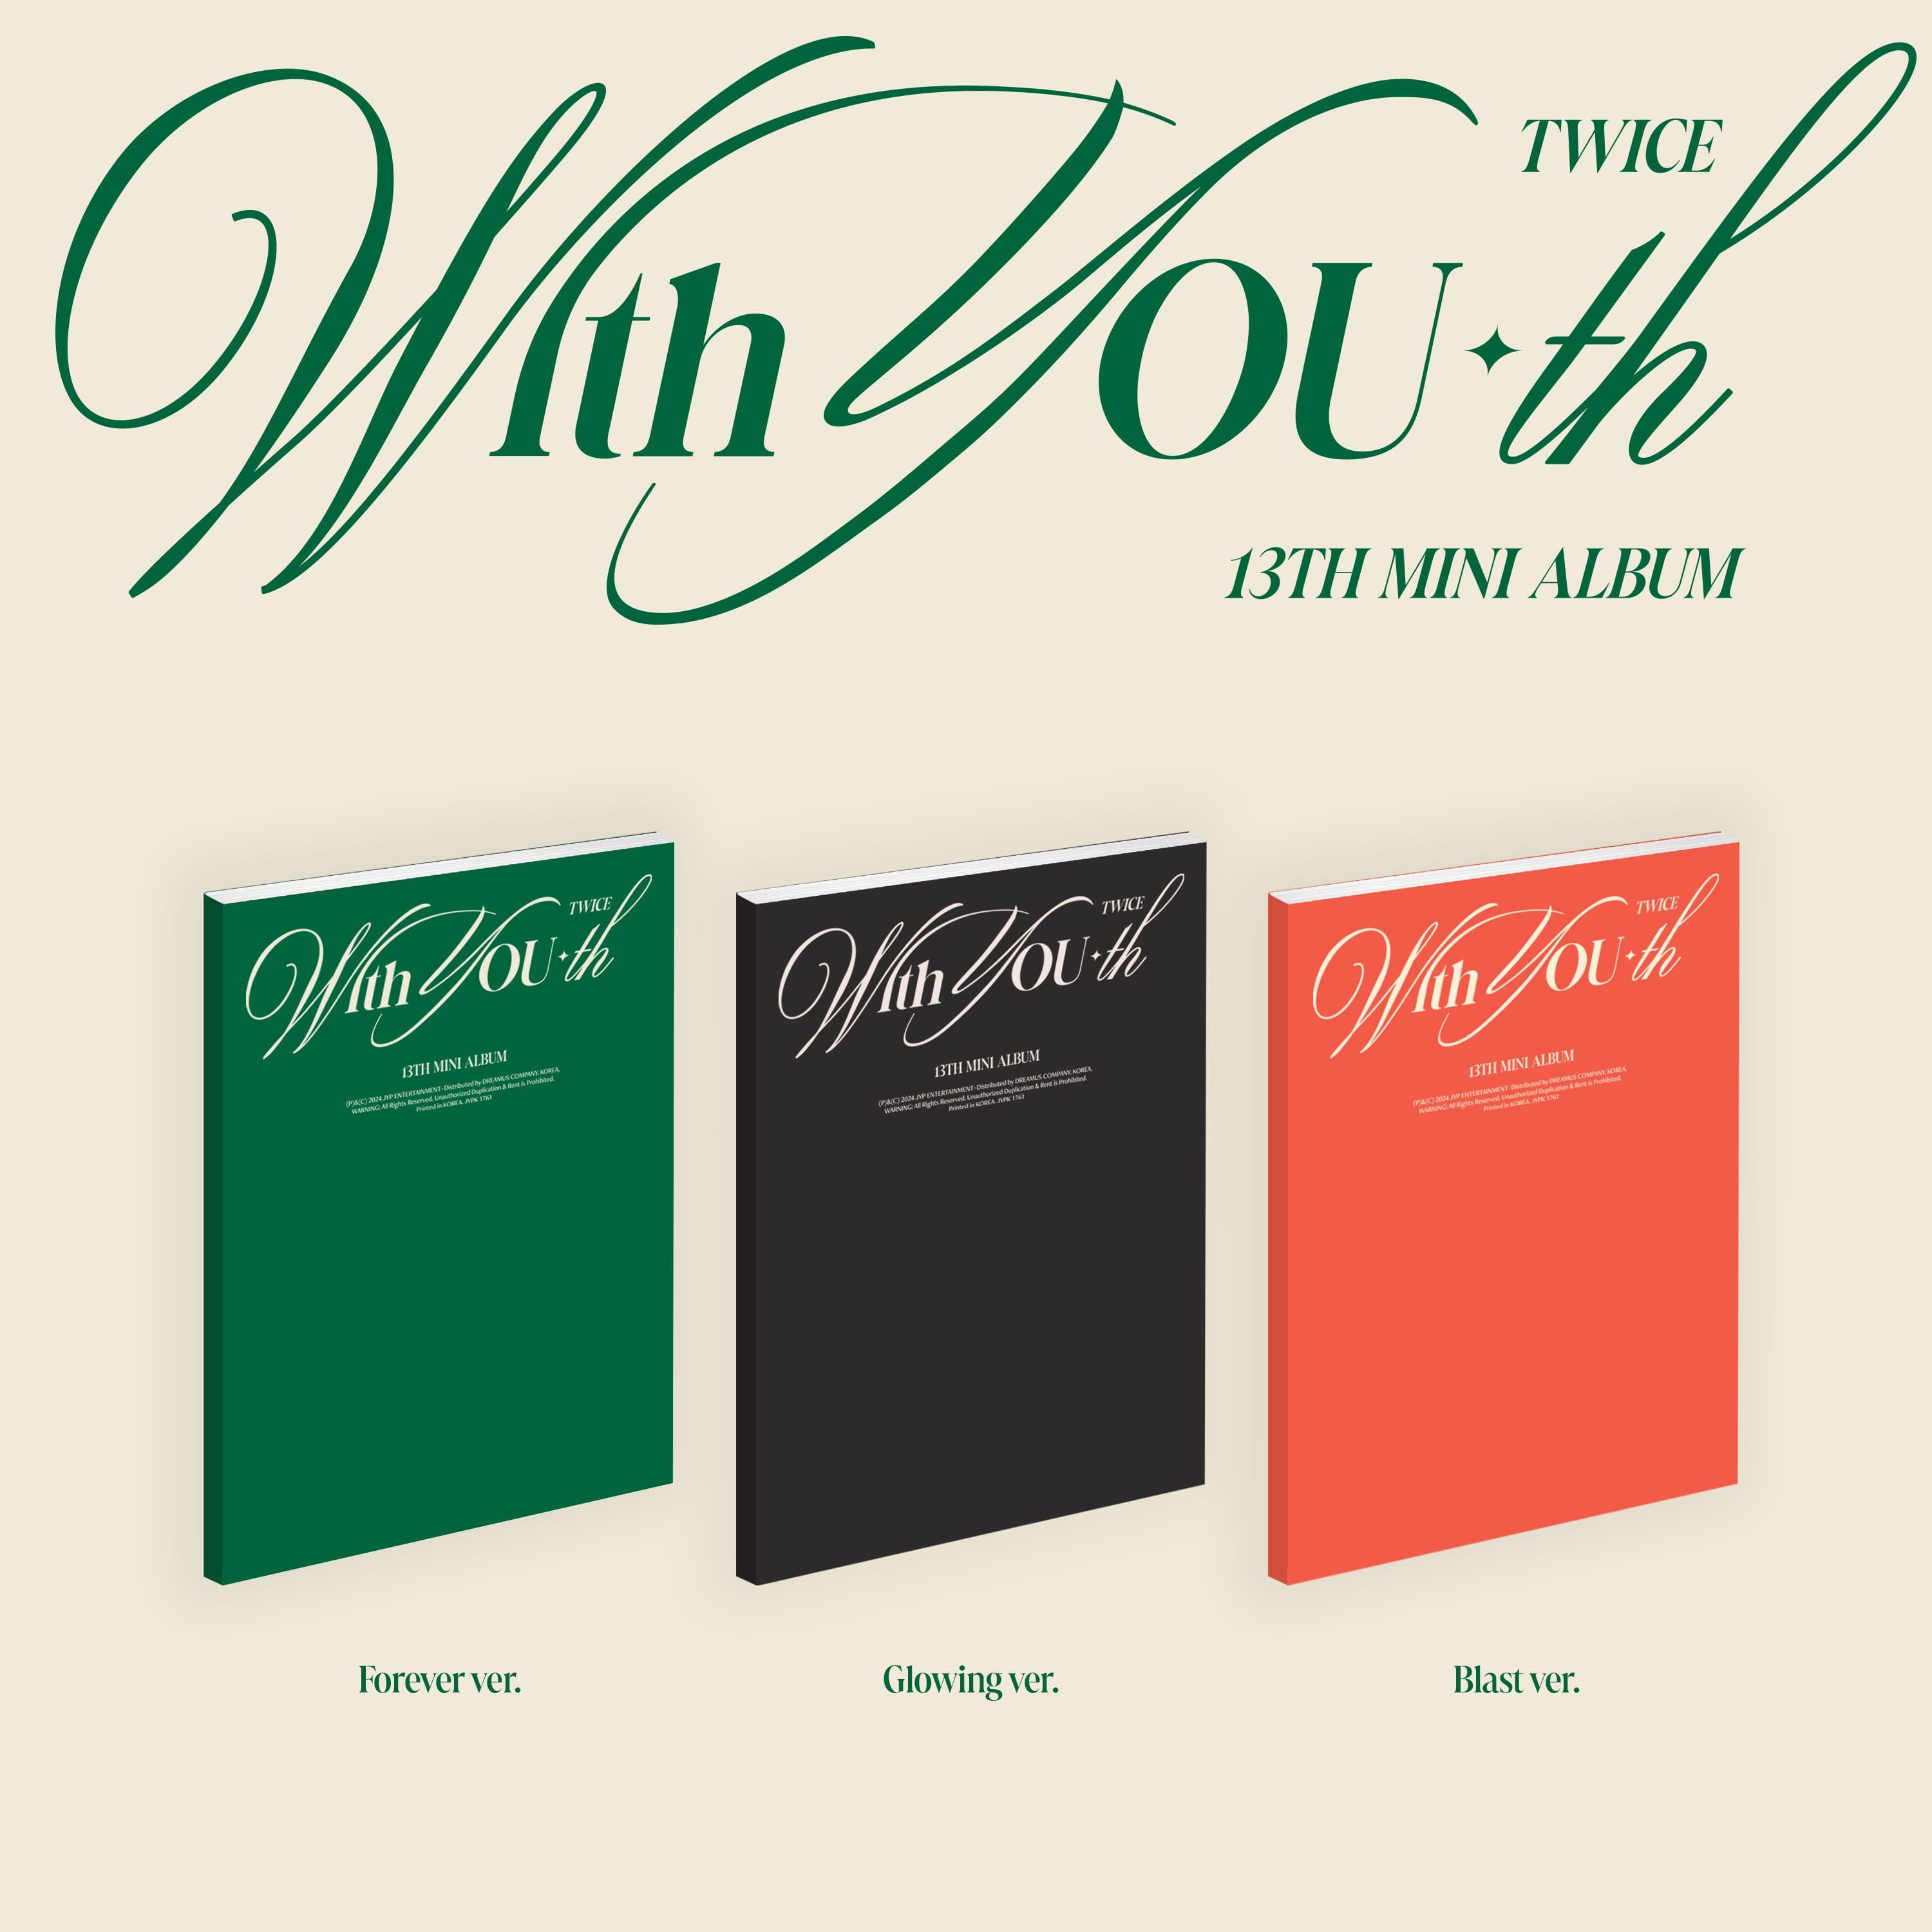 TWICE - With YOU-th – L.E. K-Pop